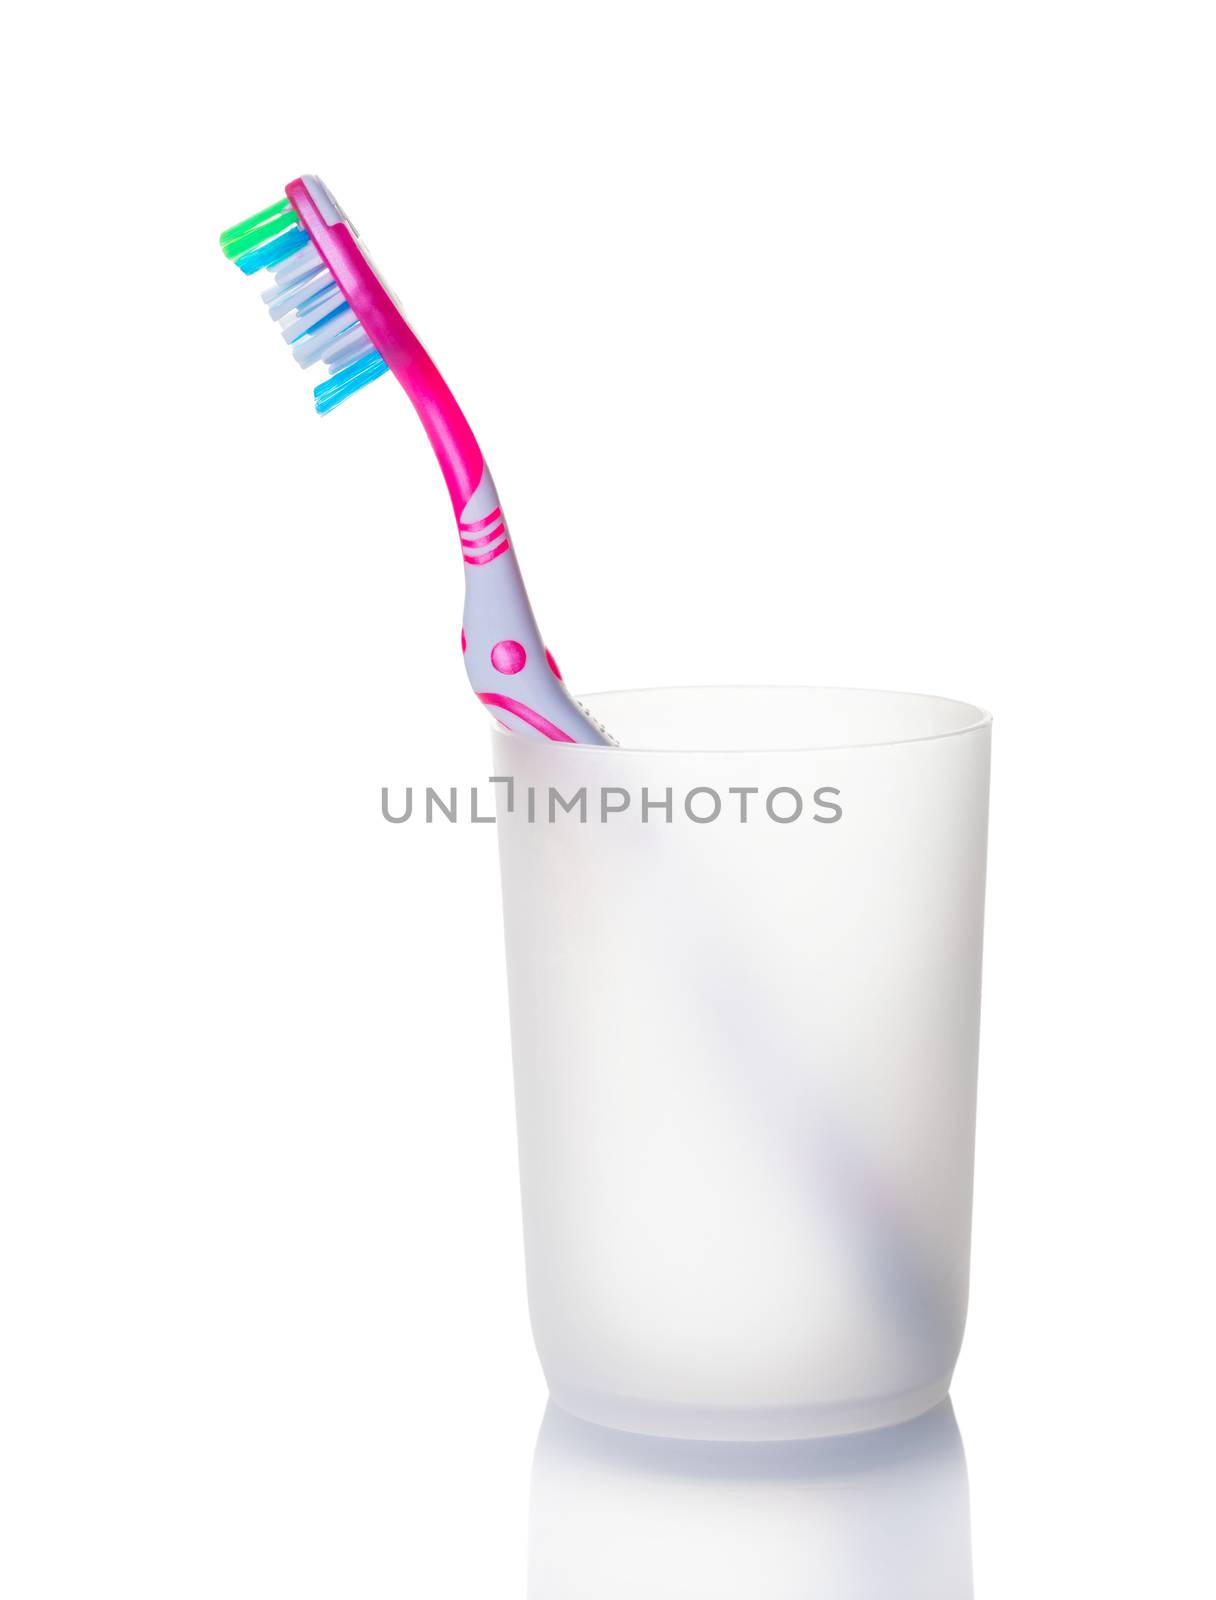 One toothbrushe in a glass  by MegaArt